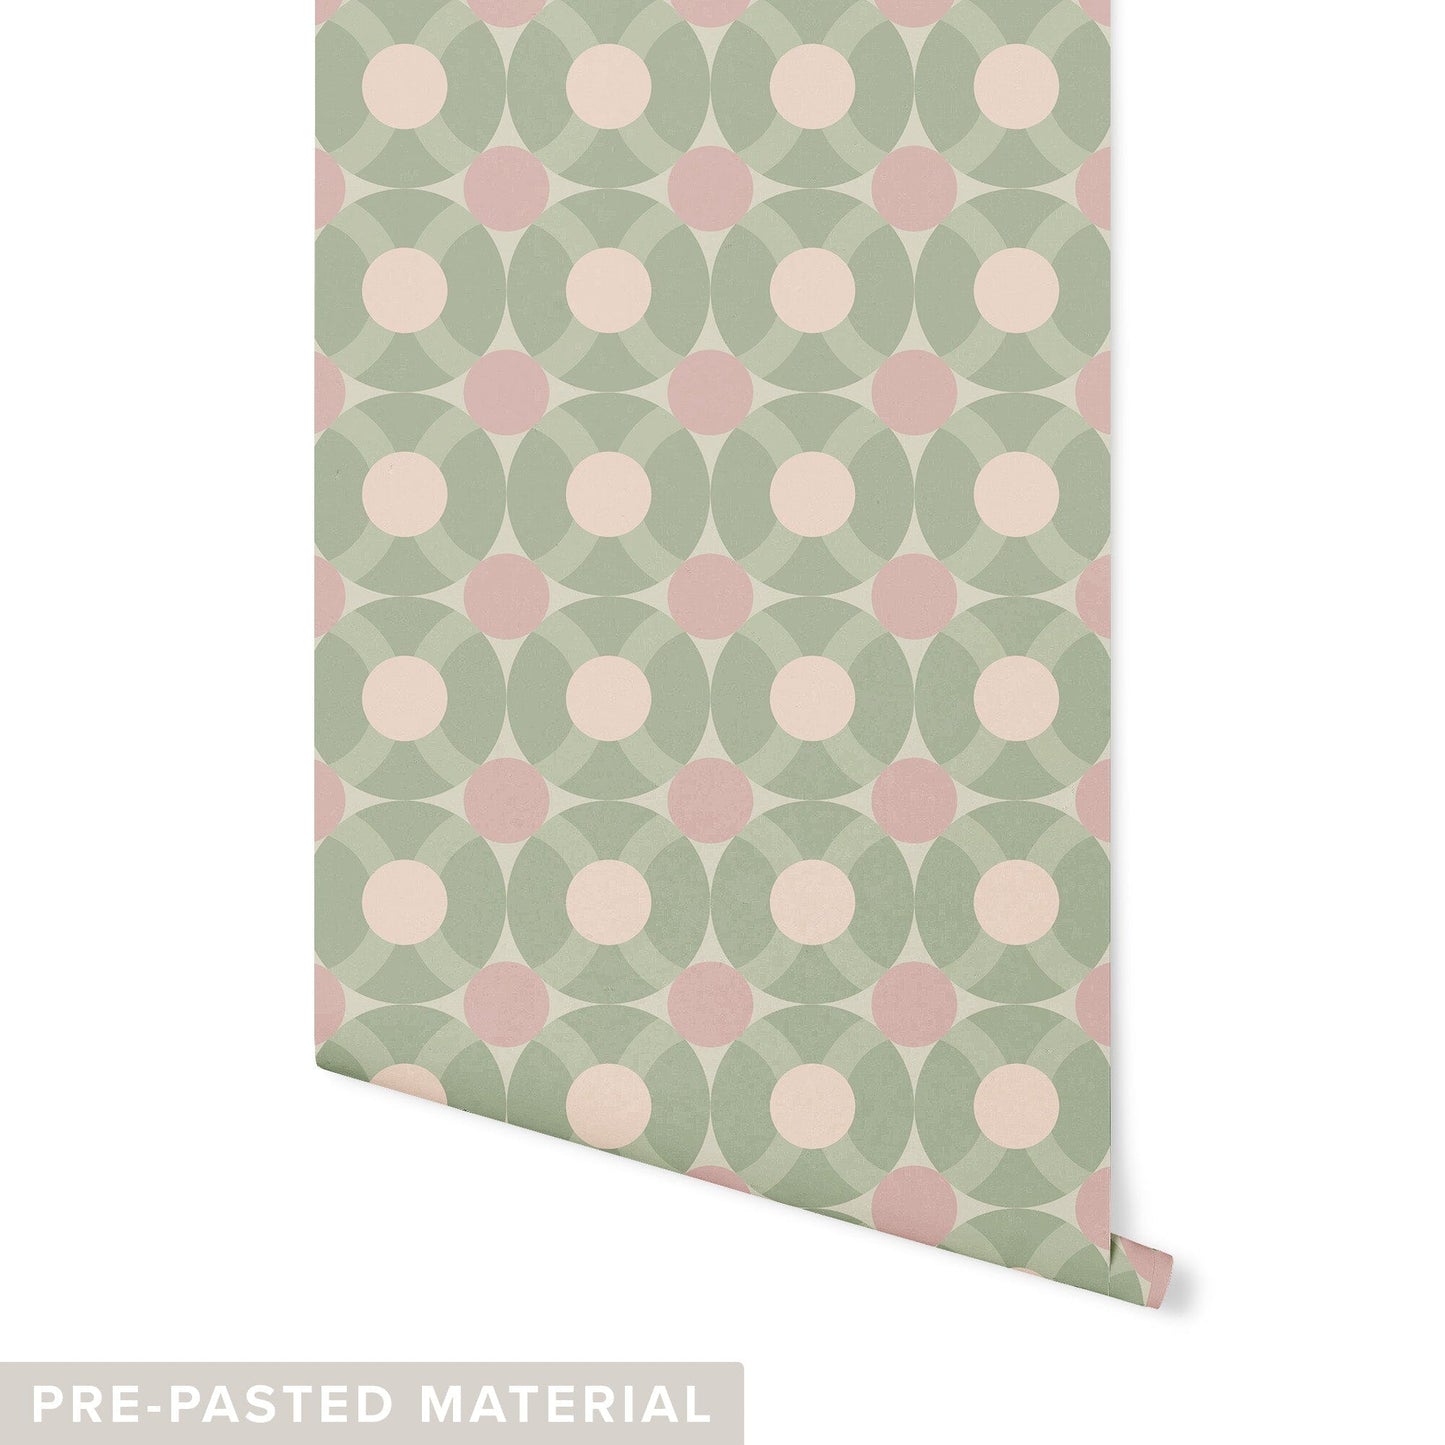 Discography Wallpaper Wallpaper Sunny Circle Studio Pre-pasted DOUBLE ROLL : 46" X 4 FEET Elegant